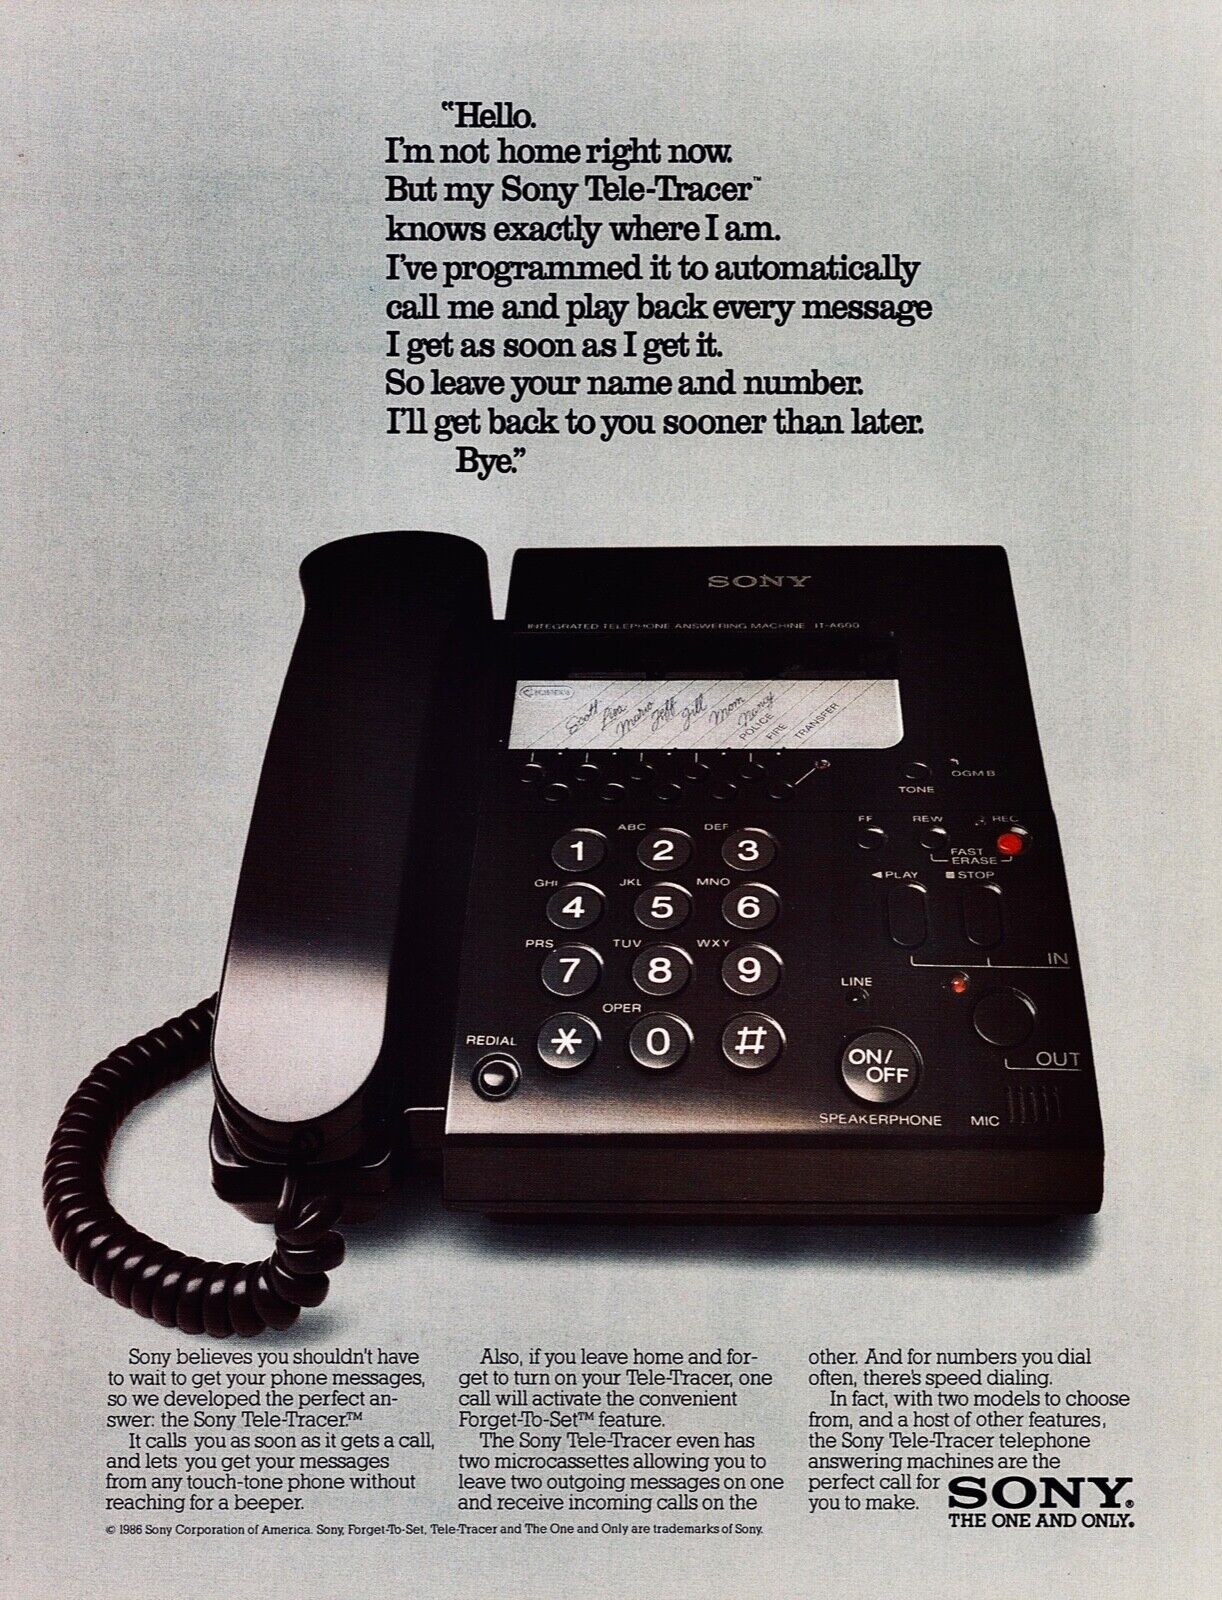 SONY Tele-Tracer Telephone Answering Machines~ VINTAGE PRINT AD ~ 1986